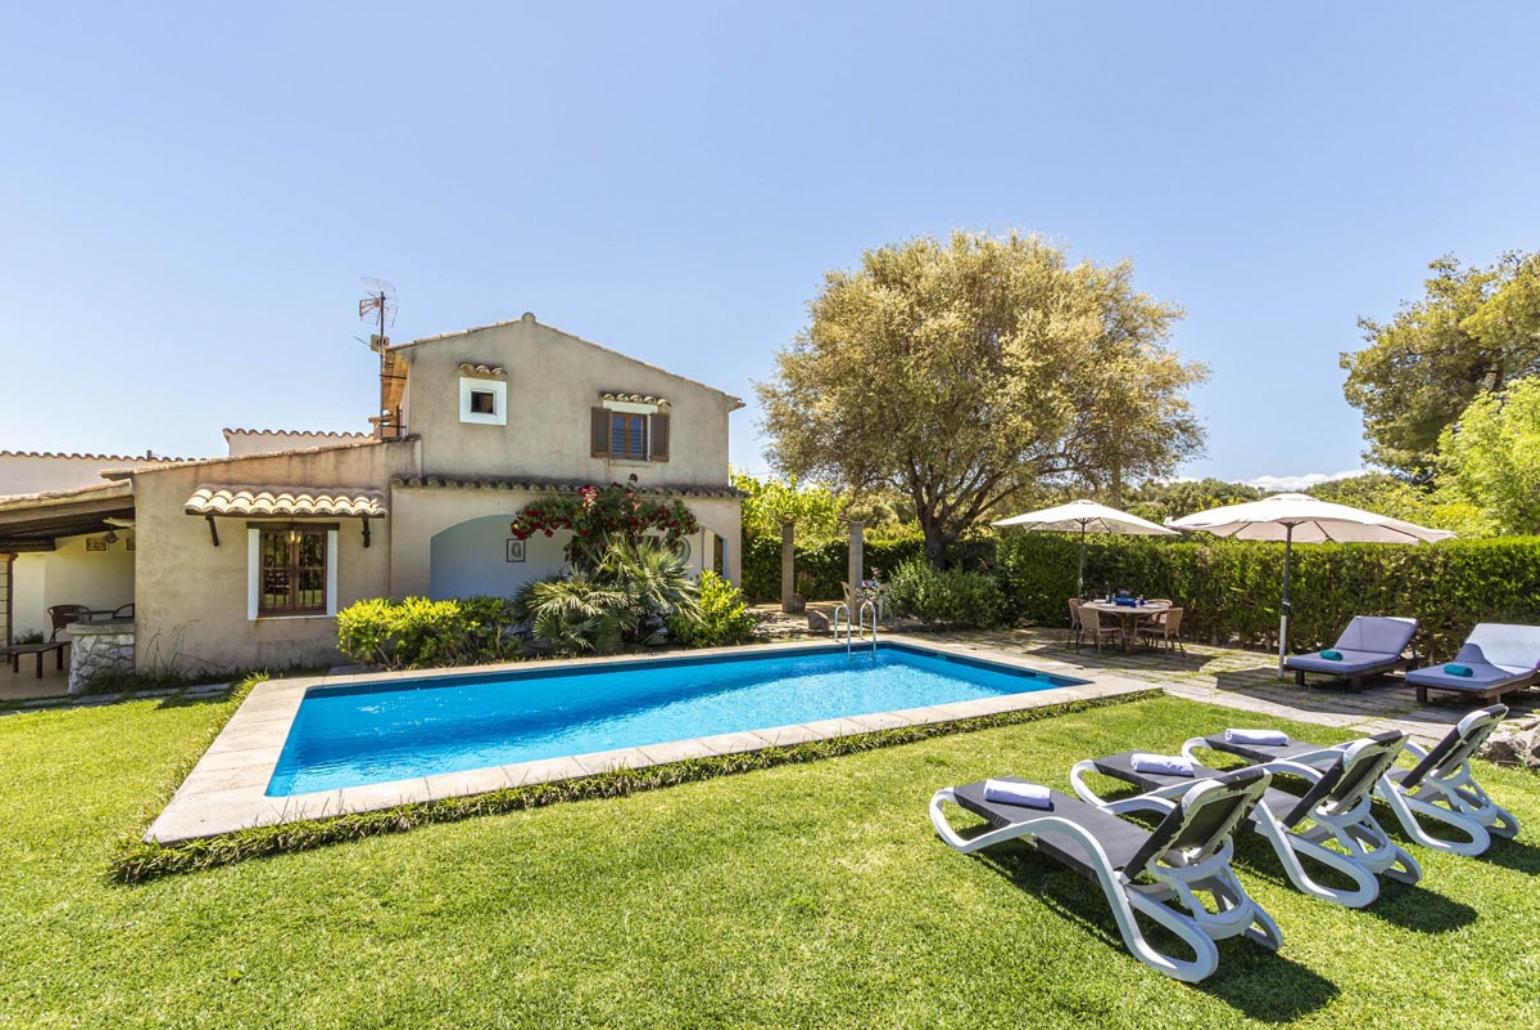 ,Beautiful villa with private swimming pool, terrace and garden